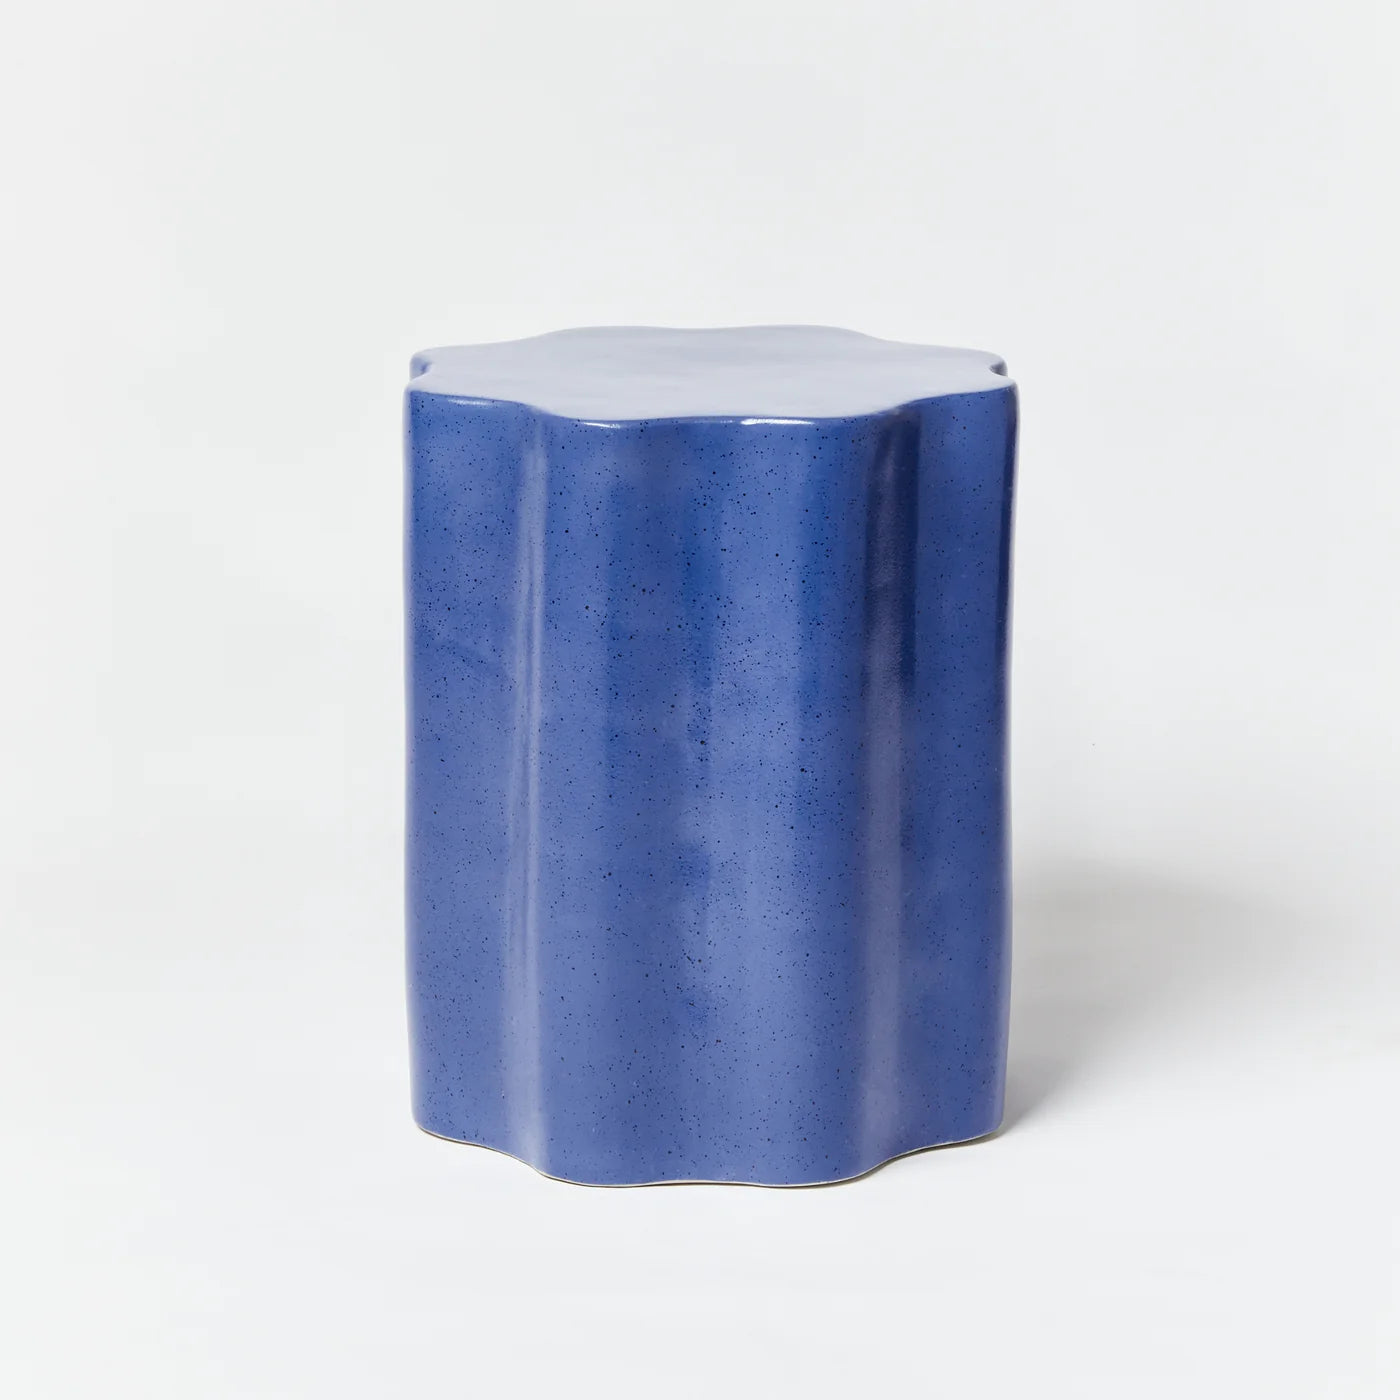 BONNIE AND NEIL WAVE SIDE TABLE: SPECKLE AZURE